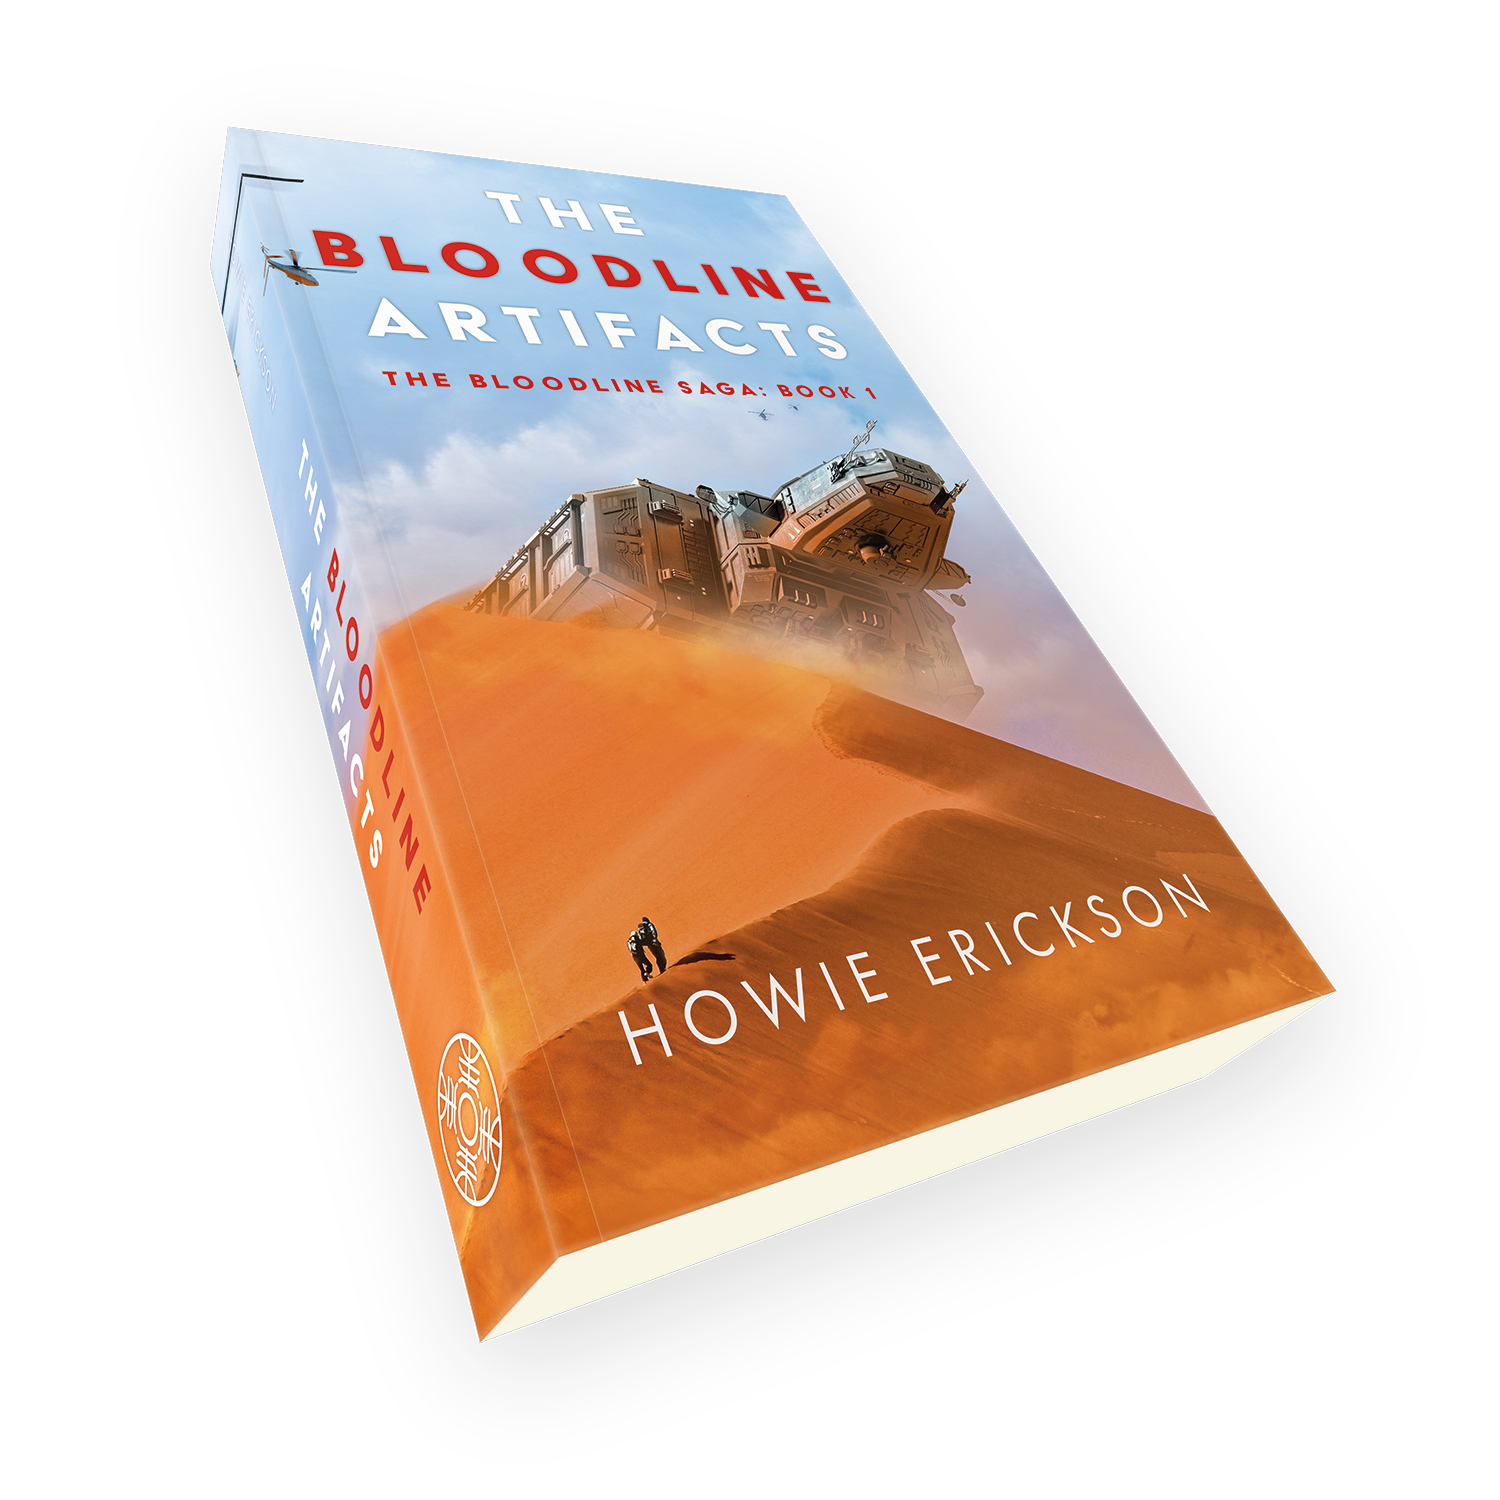 'The Bloodline Artifacts' is book one in a great dual-world scifi thriller series, by author Howie Erickson. The book cover was designed by Mark Thomas, of coverness.com. To find out more about my book design services, please visit www.coverness.com.